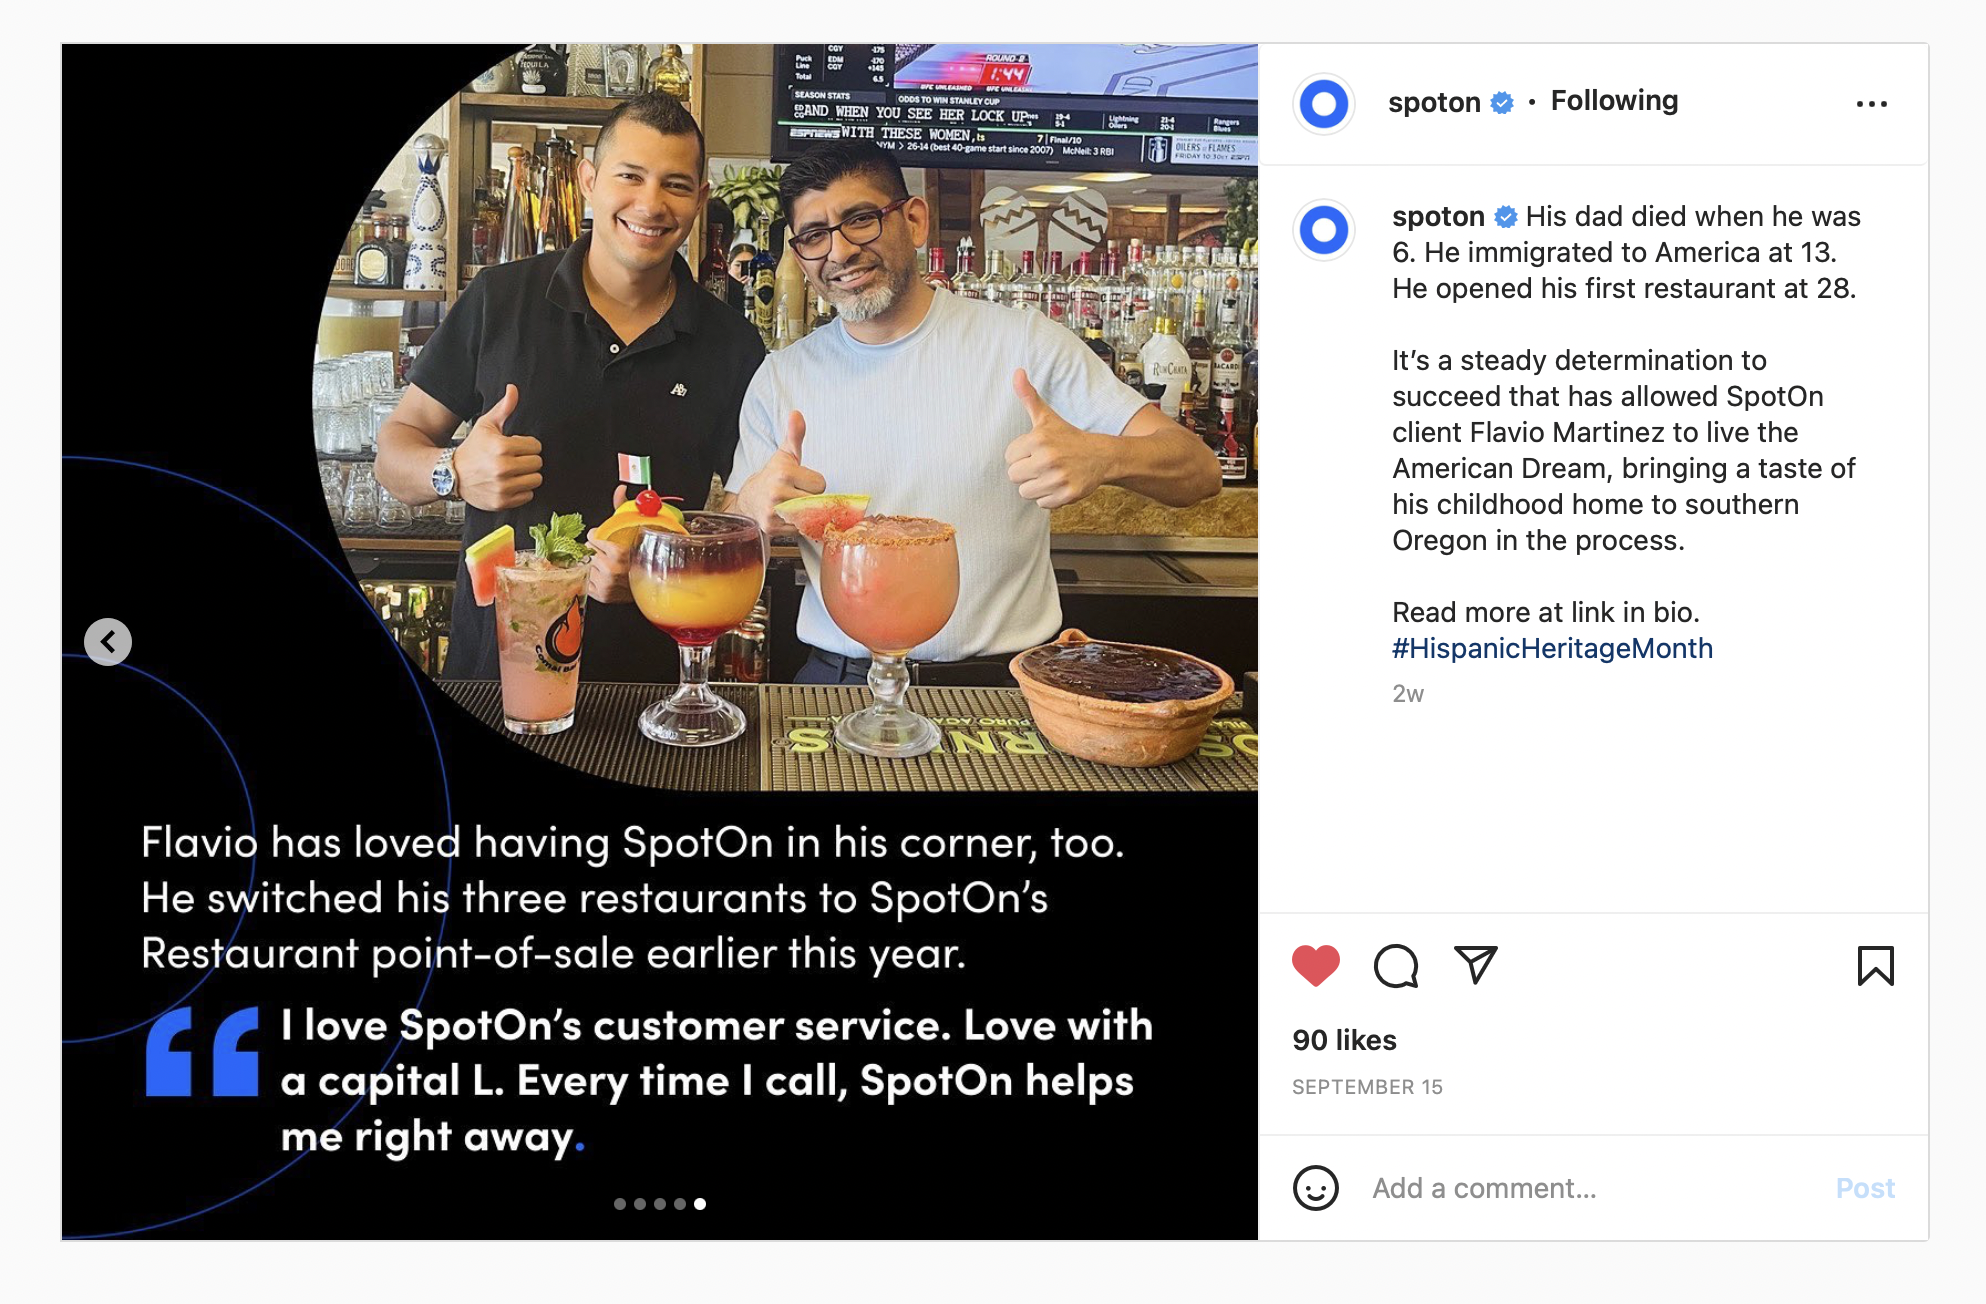 Screenshot of an Instagram image where two men are posing in front of drinks.